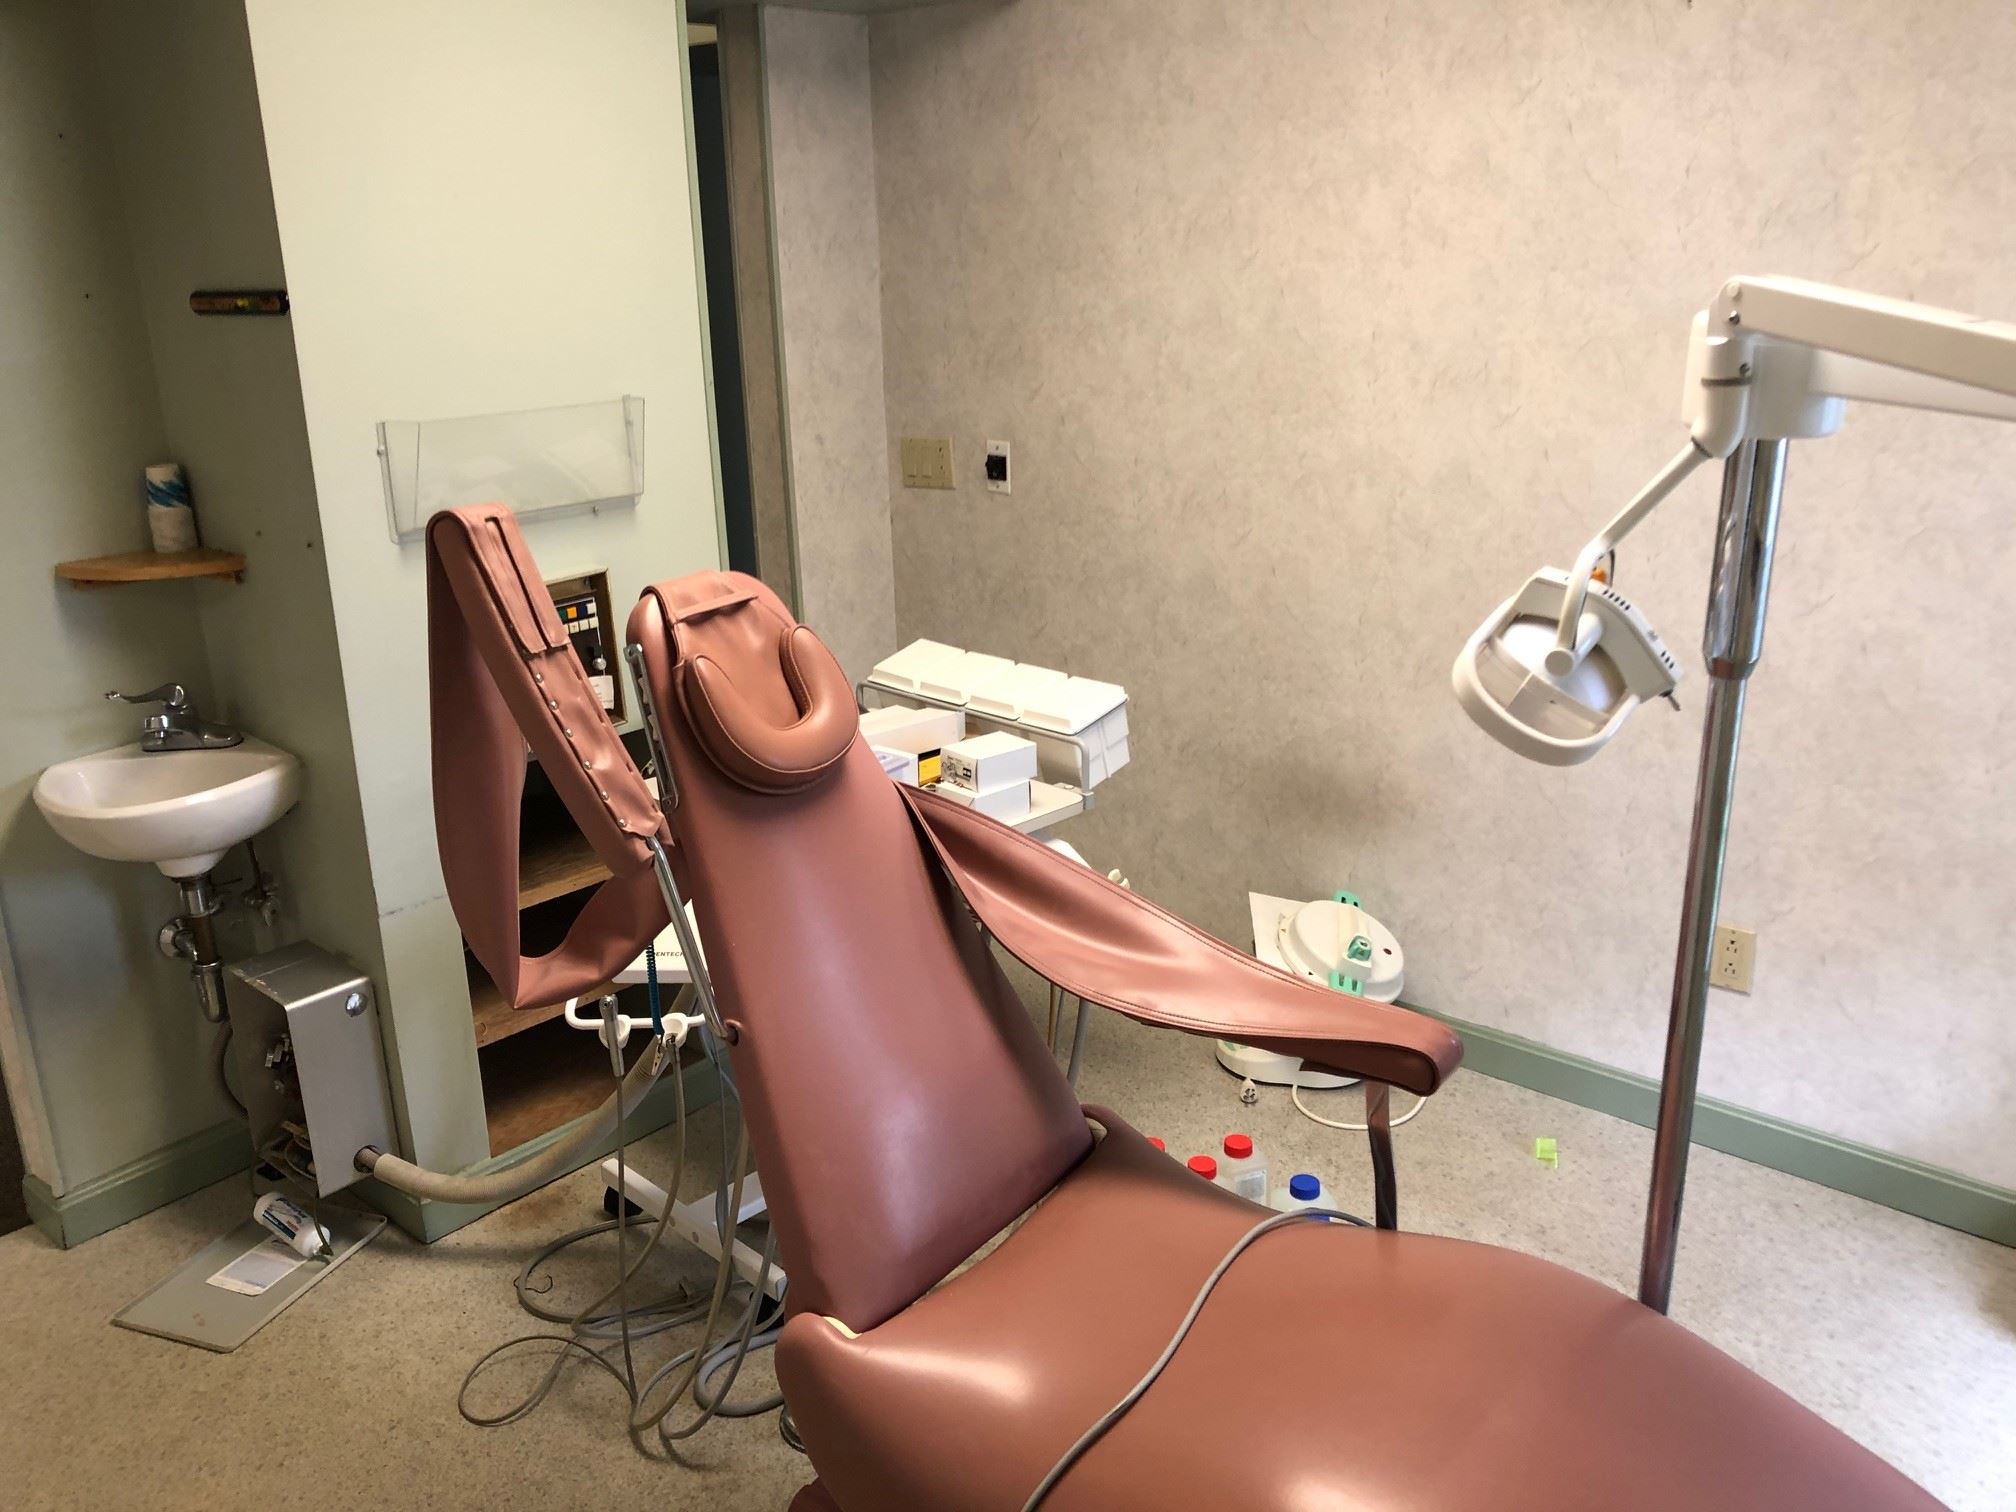 Dental operating chair: asking $2,000 with support pieces